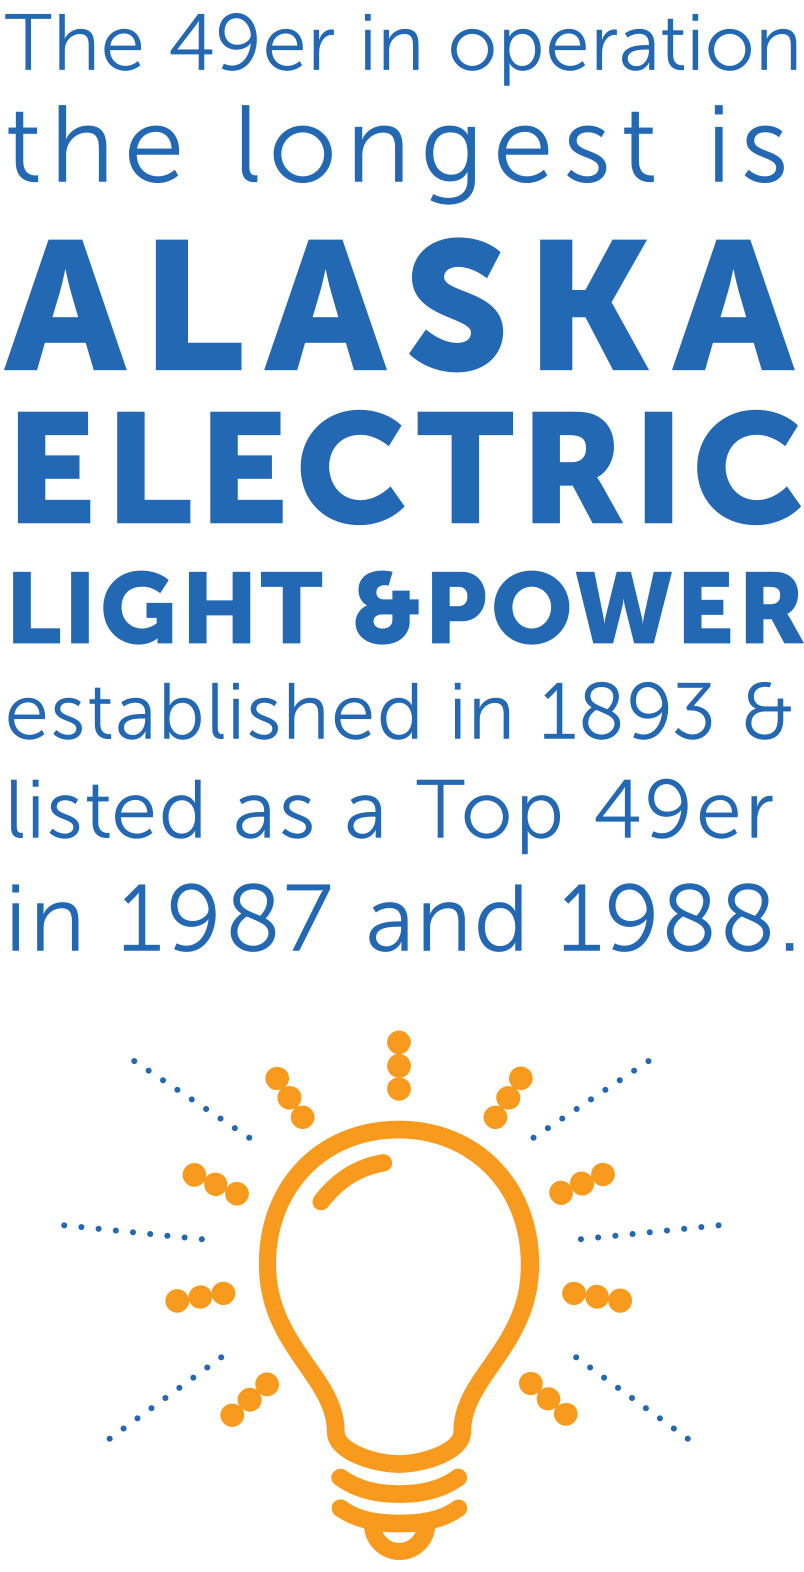 Alaska Electric Light and Power has been in operation the longest.